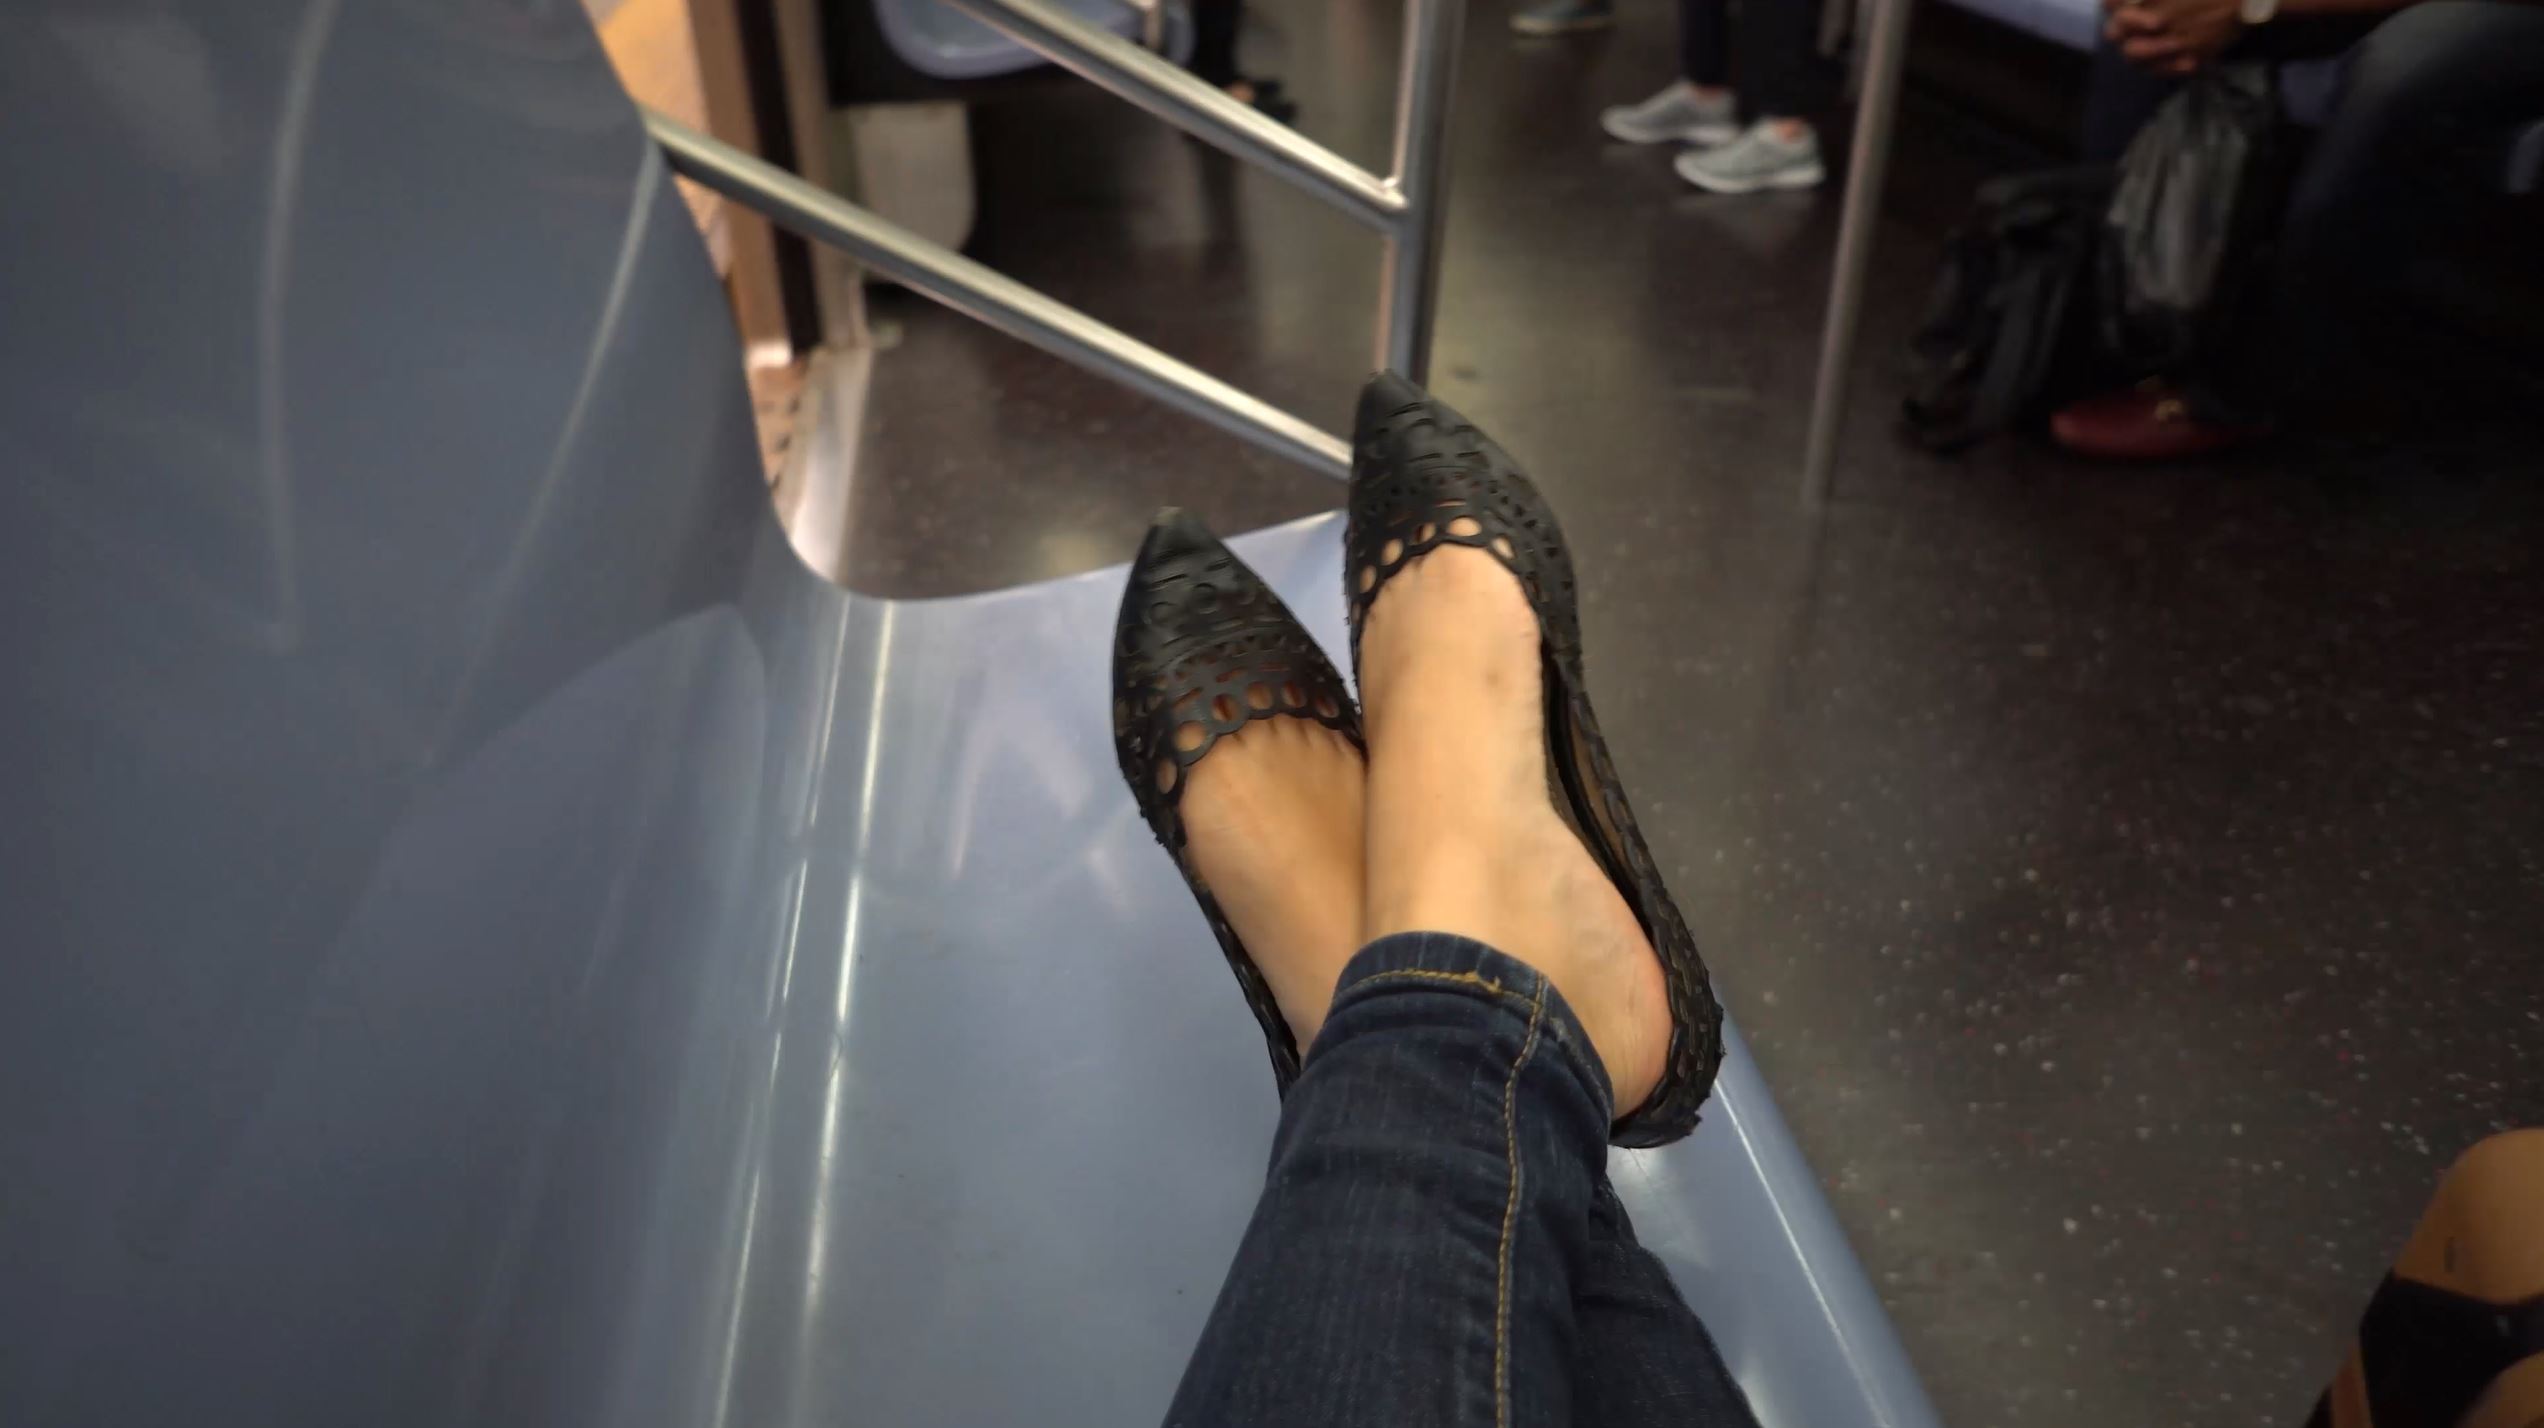 25 Things You Need to Know About the NYC Subway feet on seat